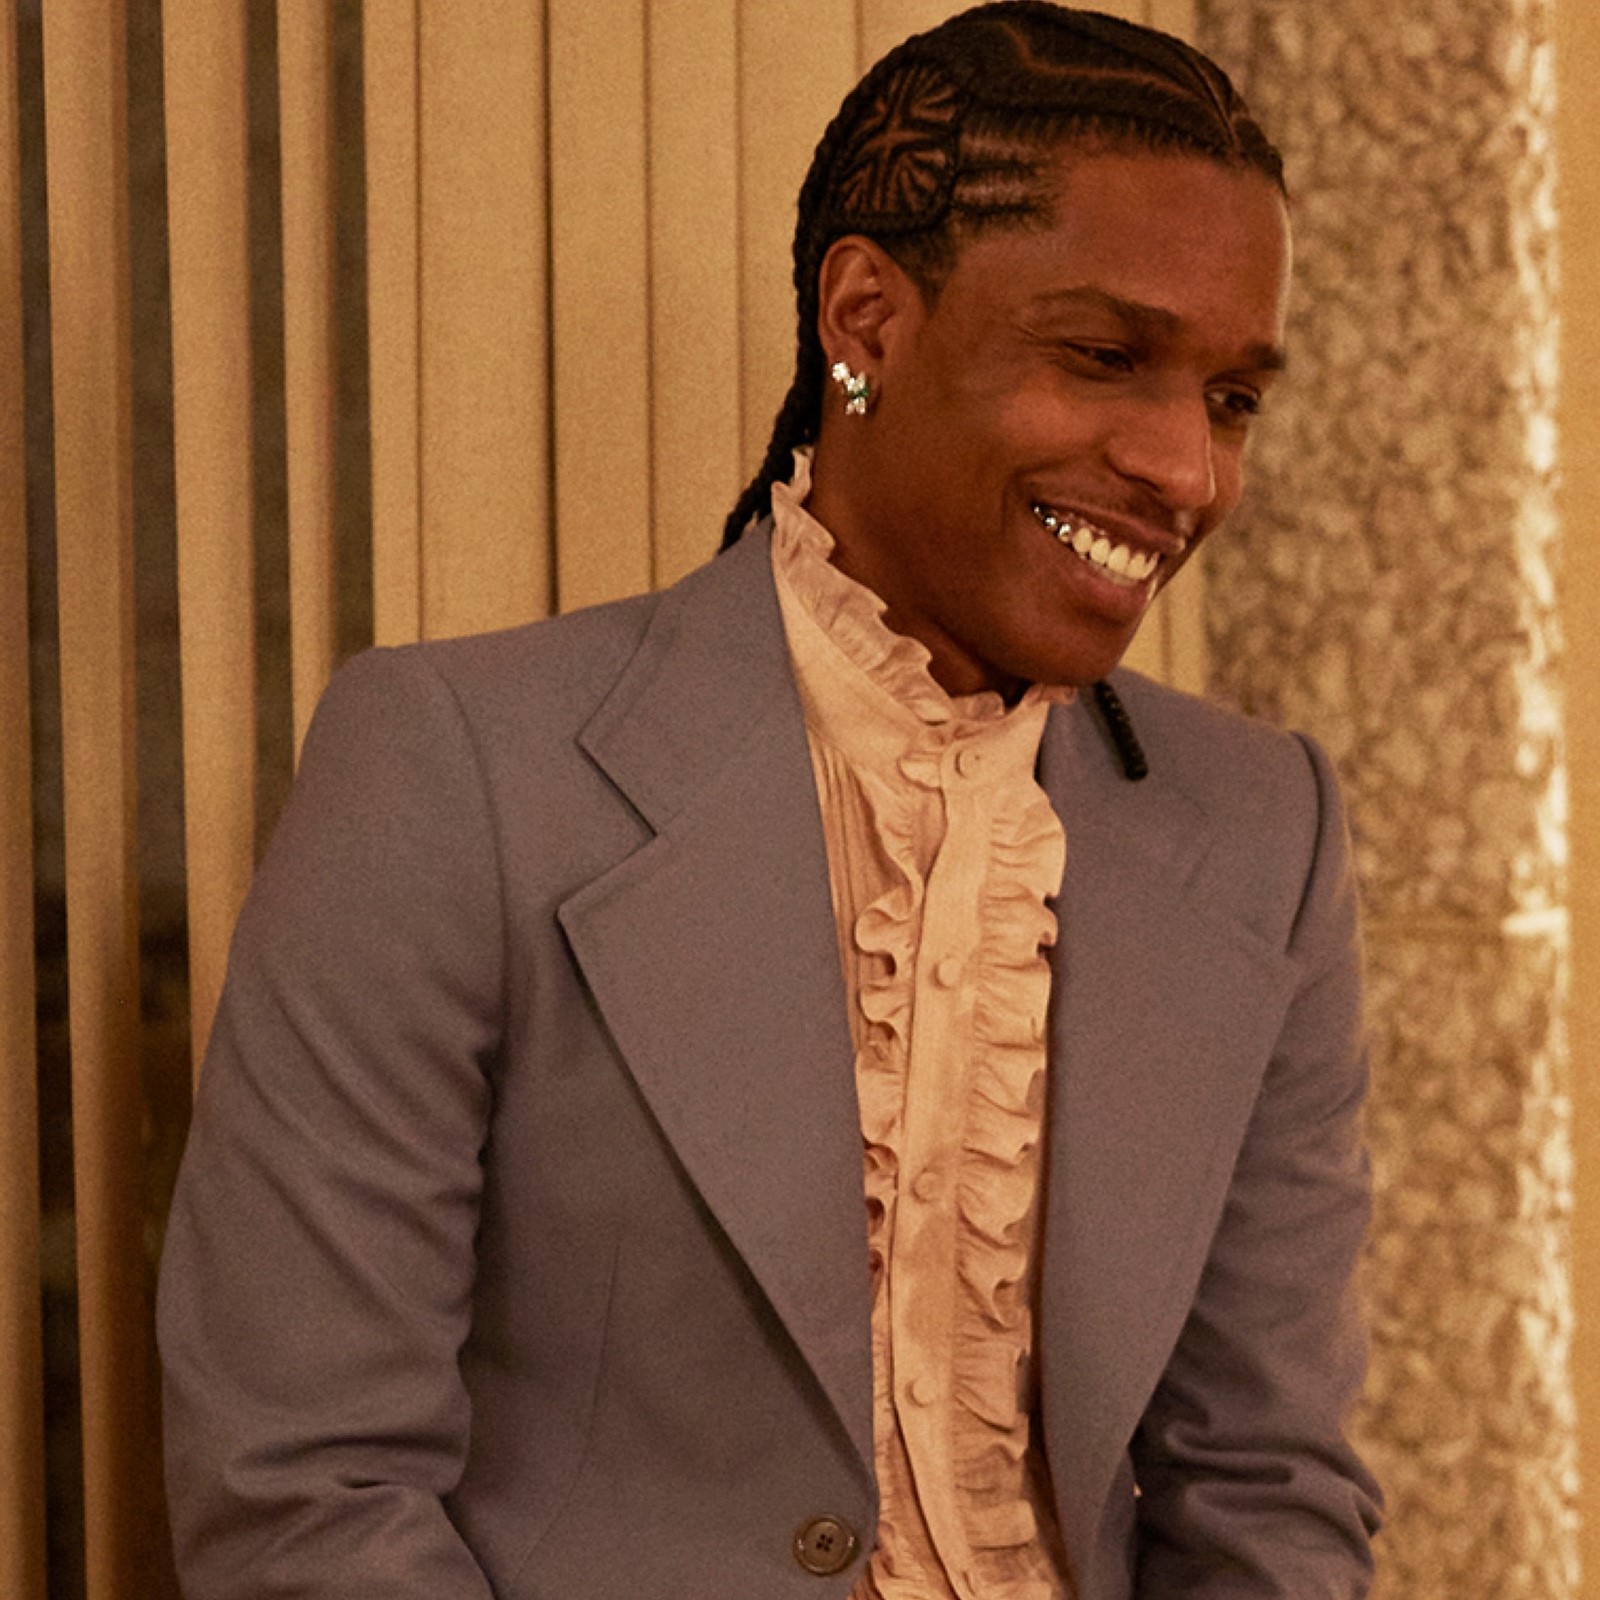 ASAP Rocky at Gucci's Fashion Show 🇮🇹 Follow @rejectedbysociety.rbs